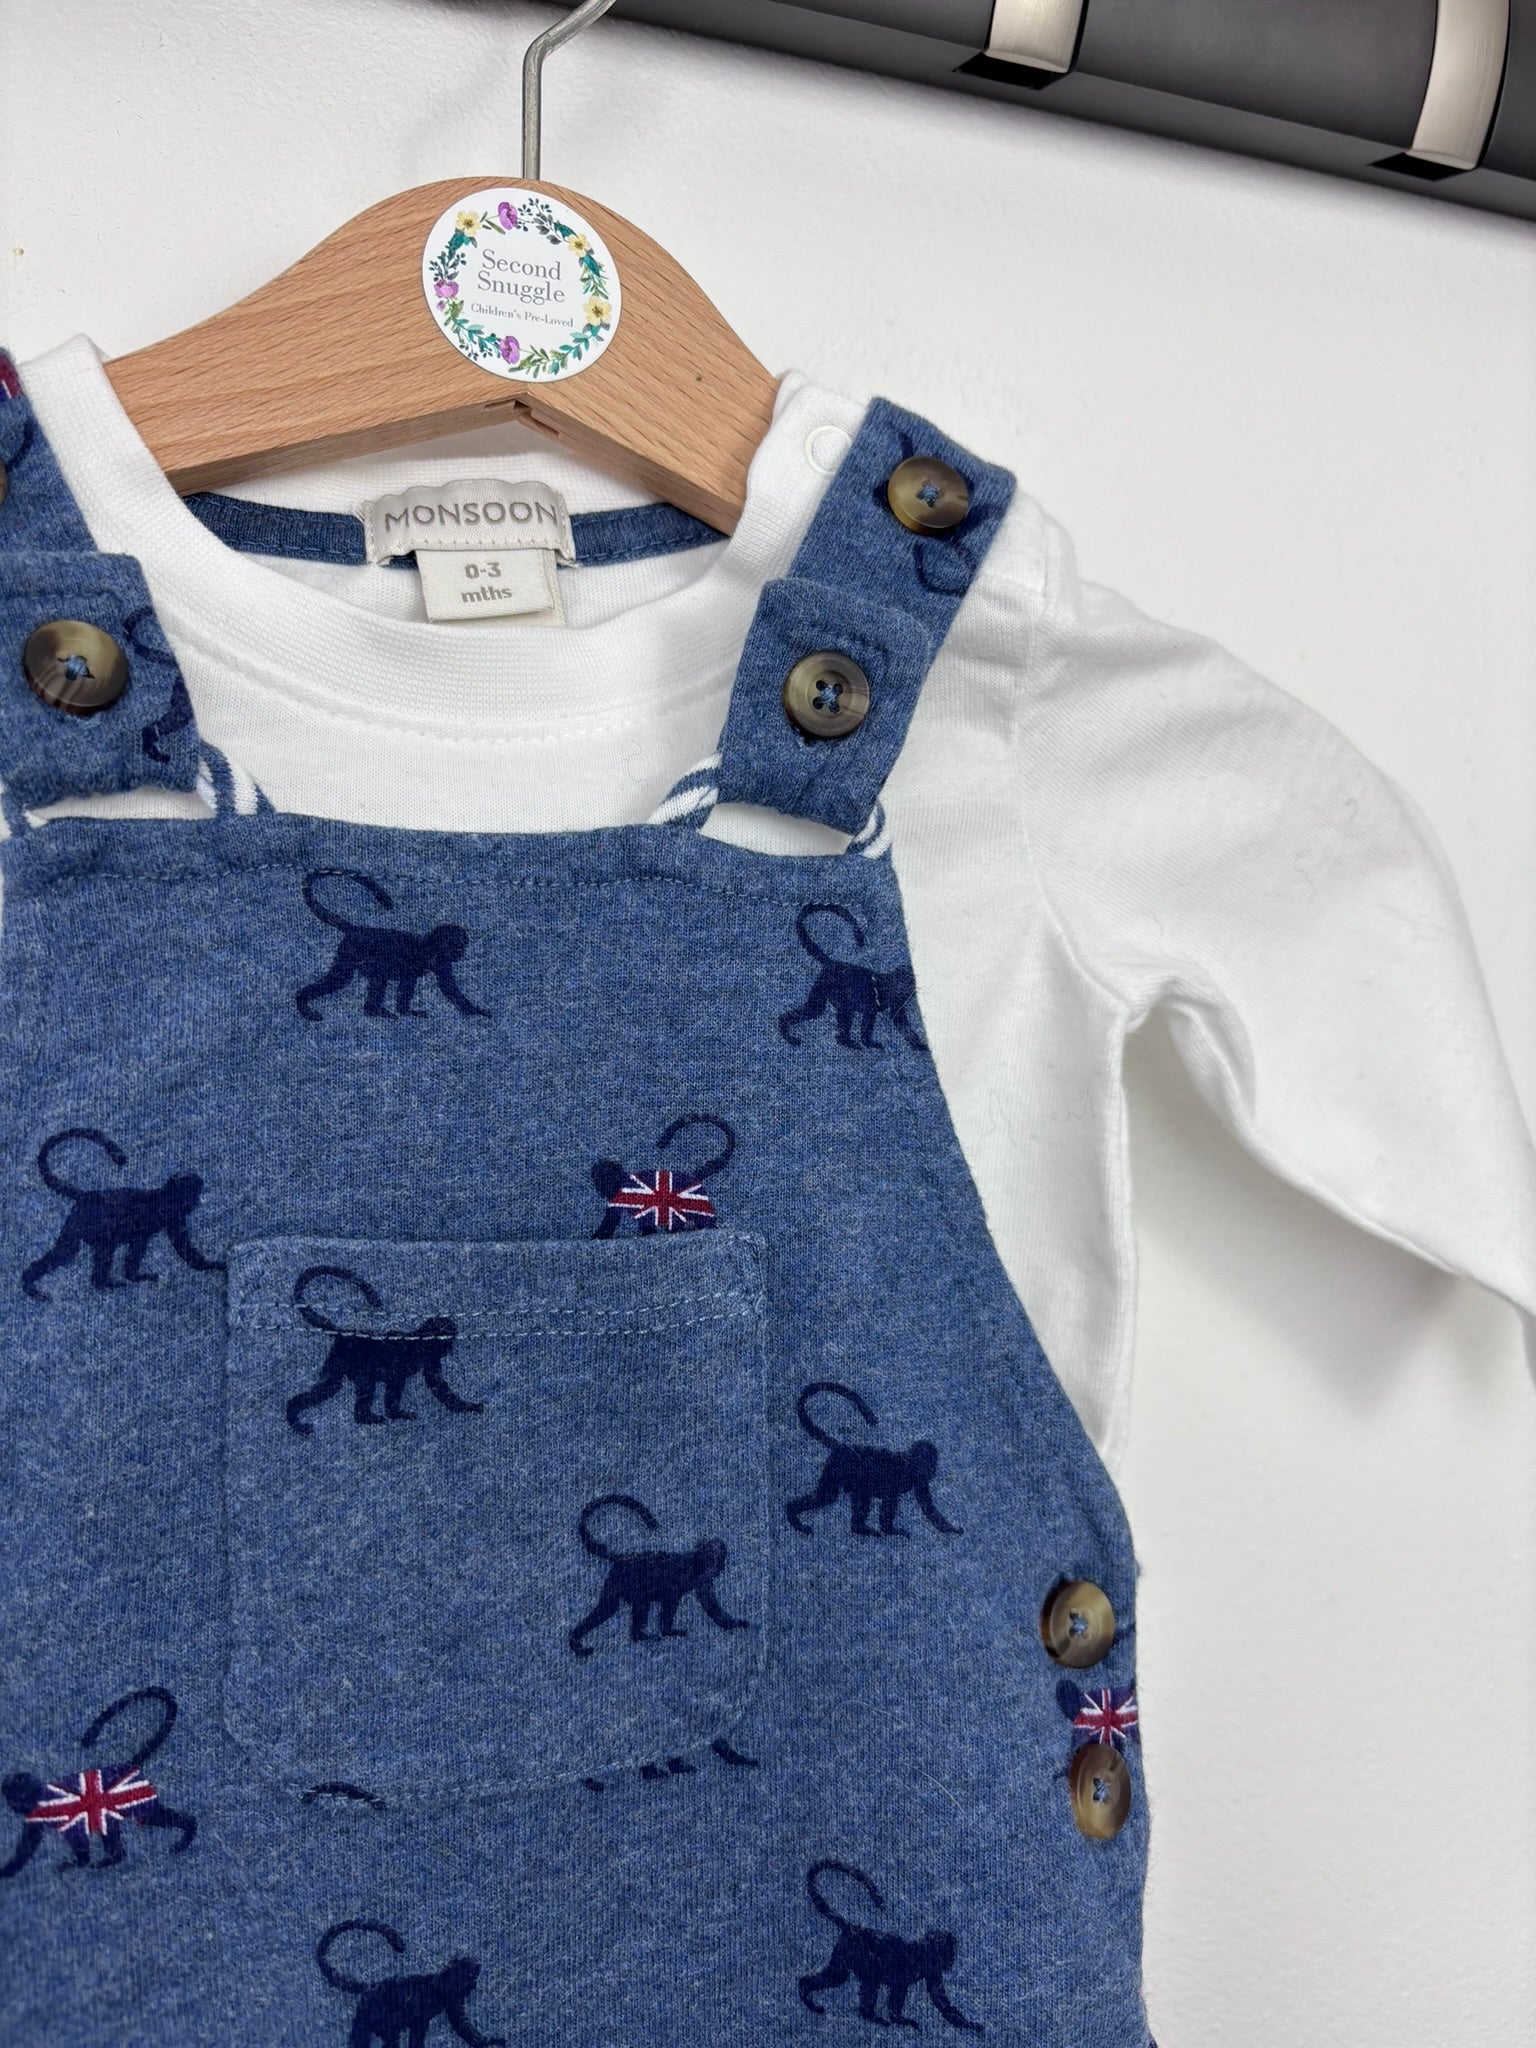 Monsoon 0-3 Months-Dungarees-Second Snuggle Preloved